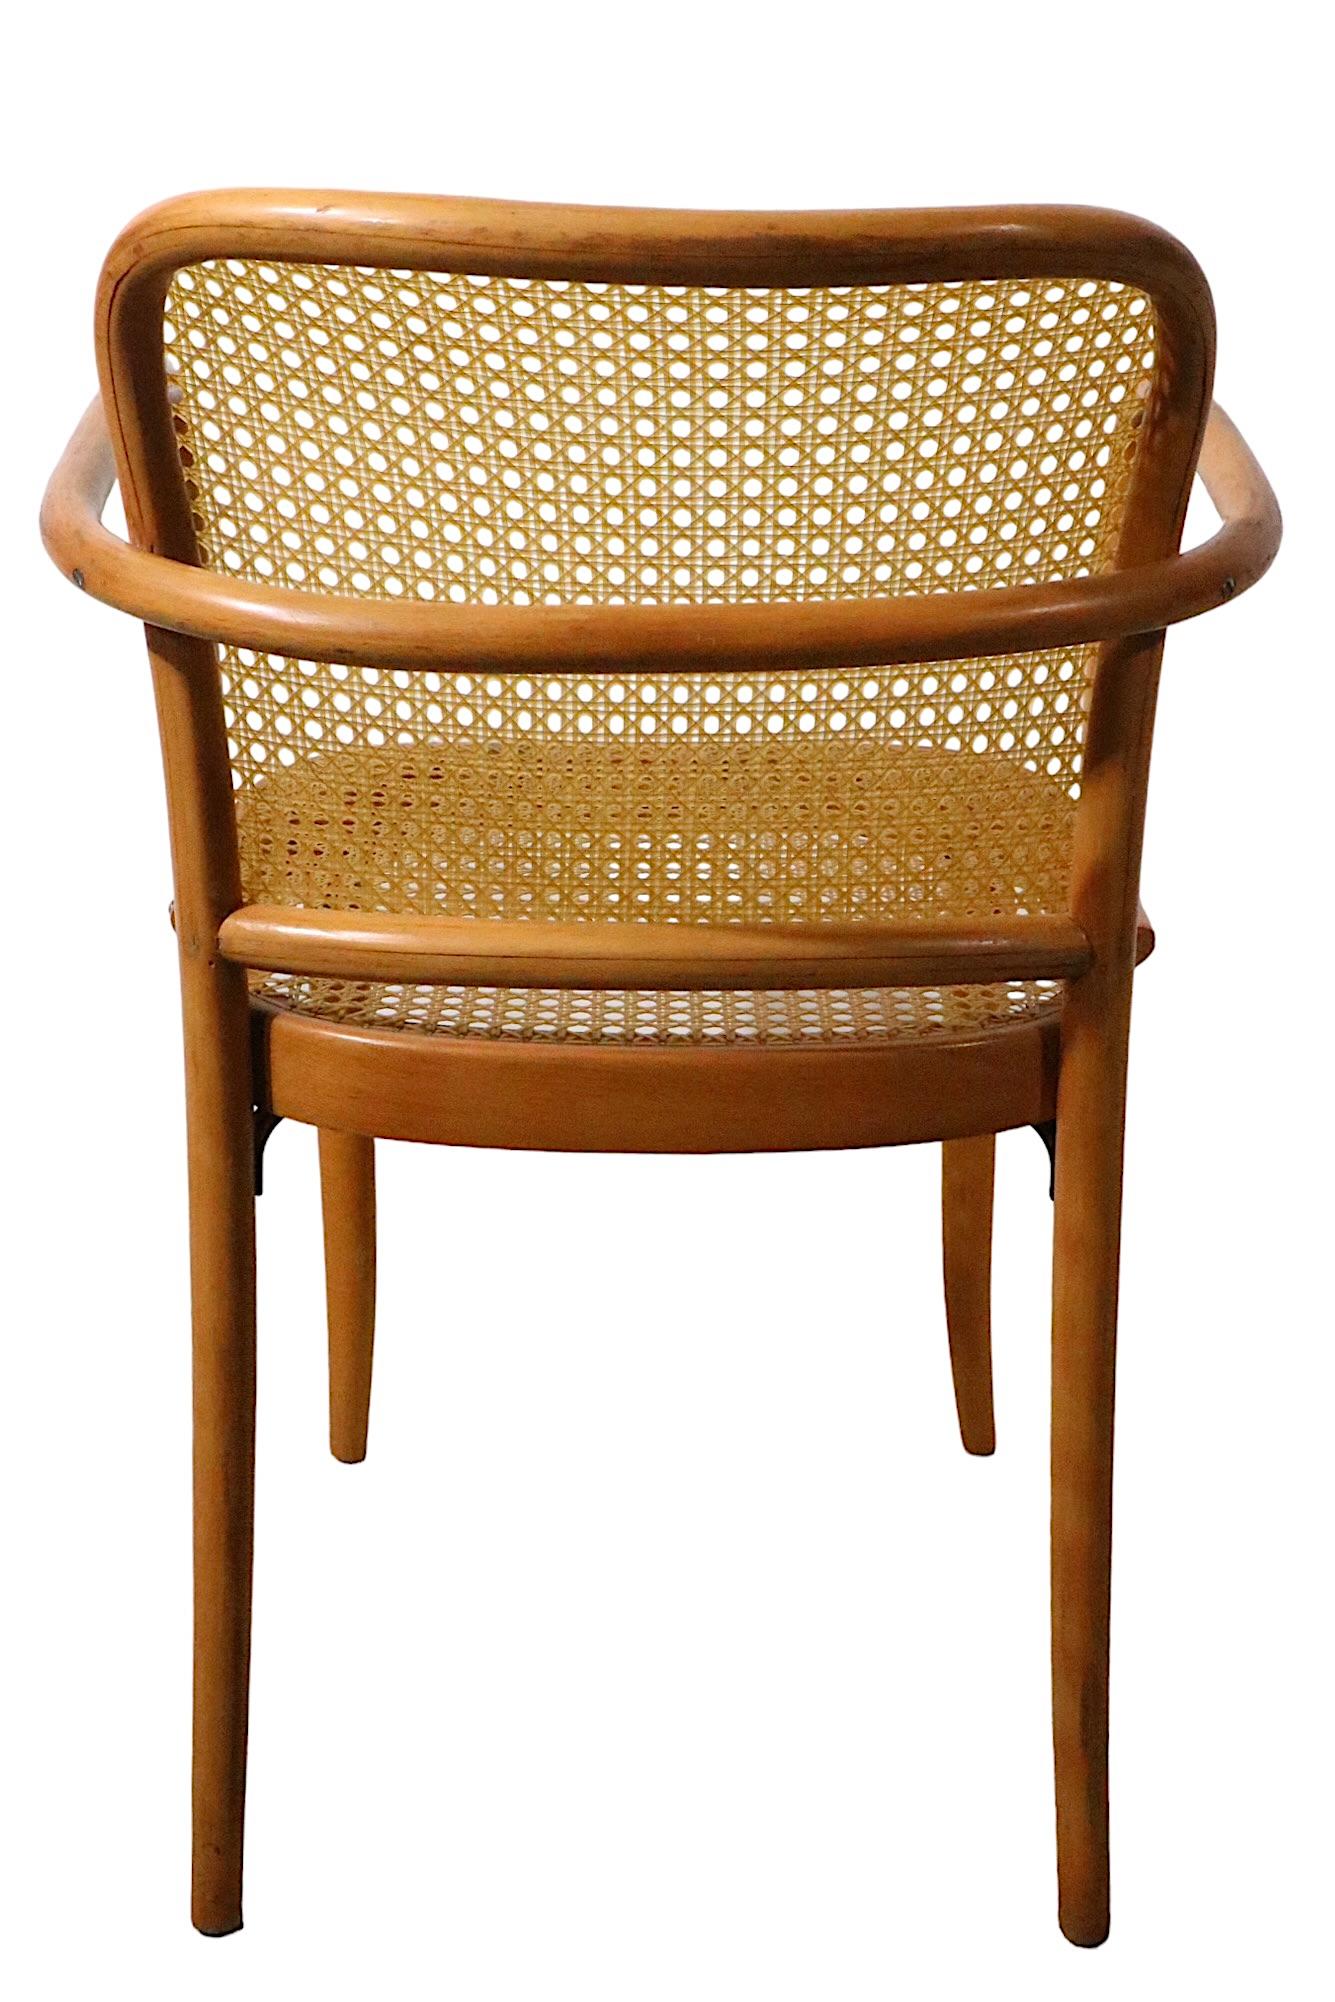 Set of 5 Josef Frank Prague Chairs Made in Czechoslovakia, circa 1970s For Sale 4